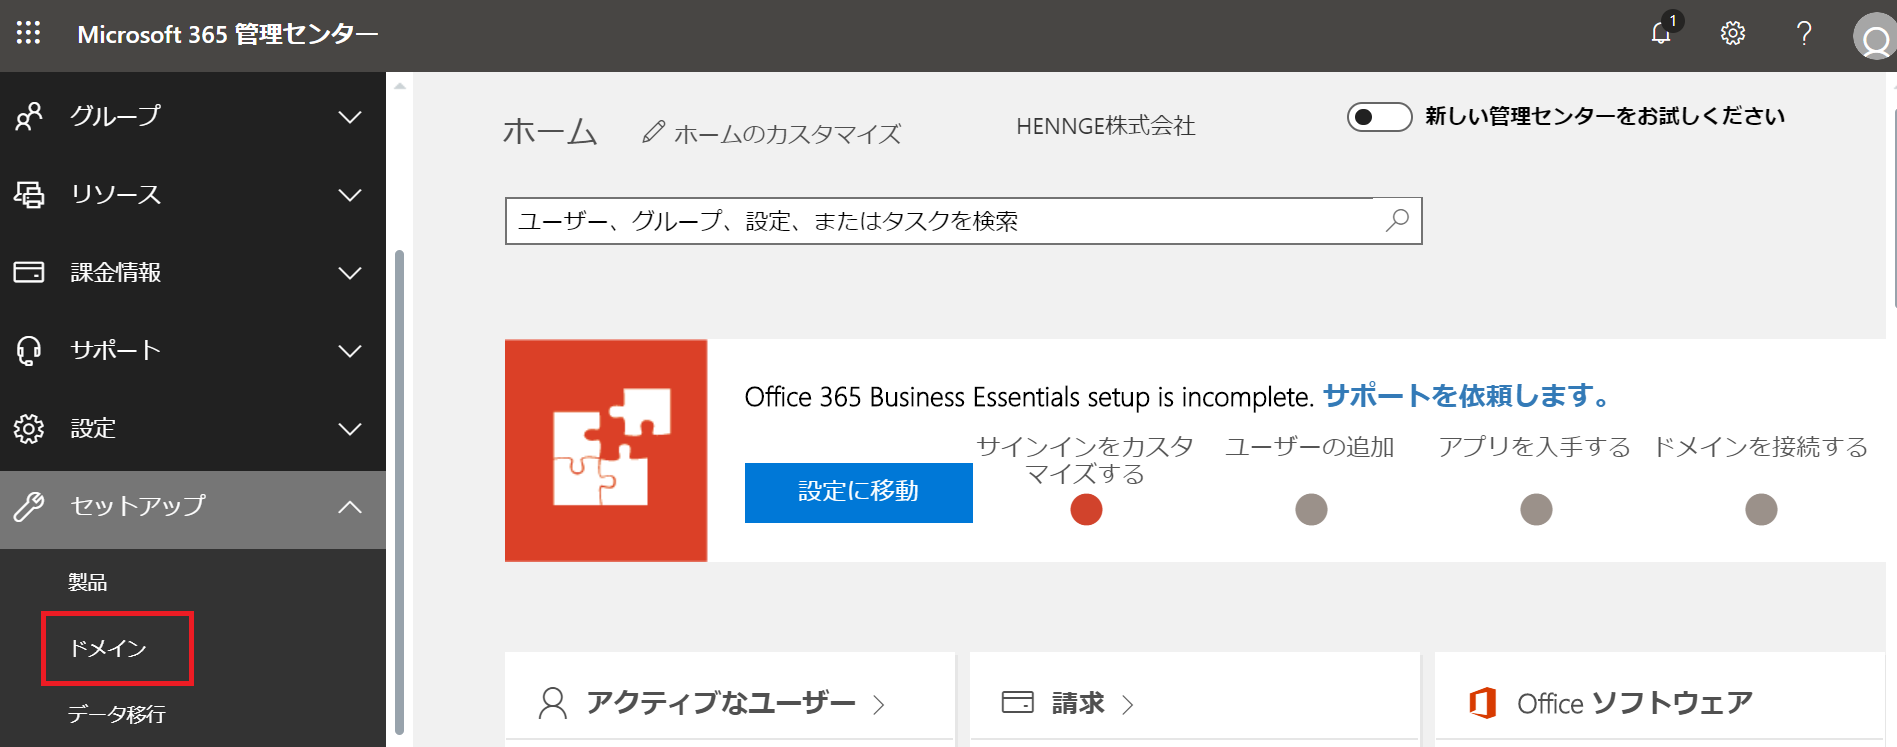 Office365______.png